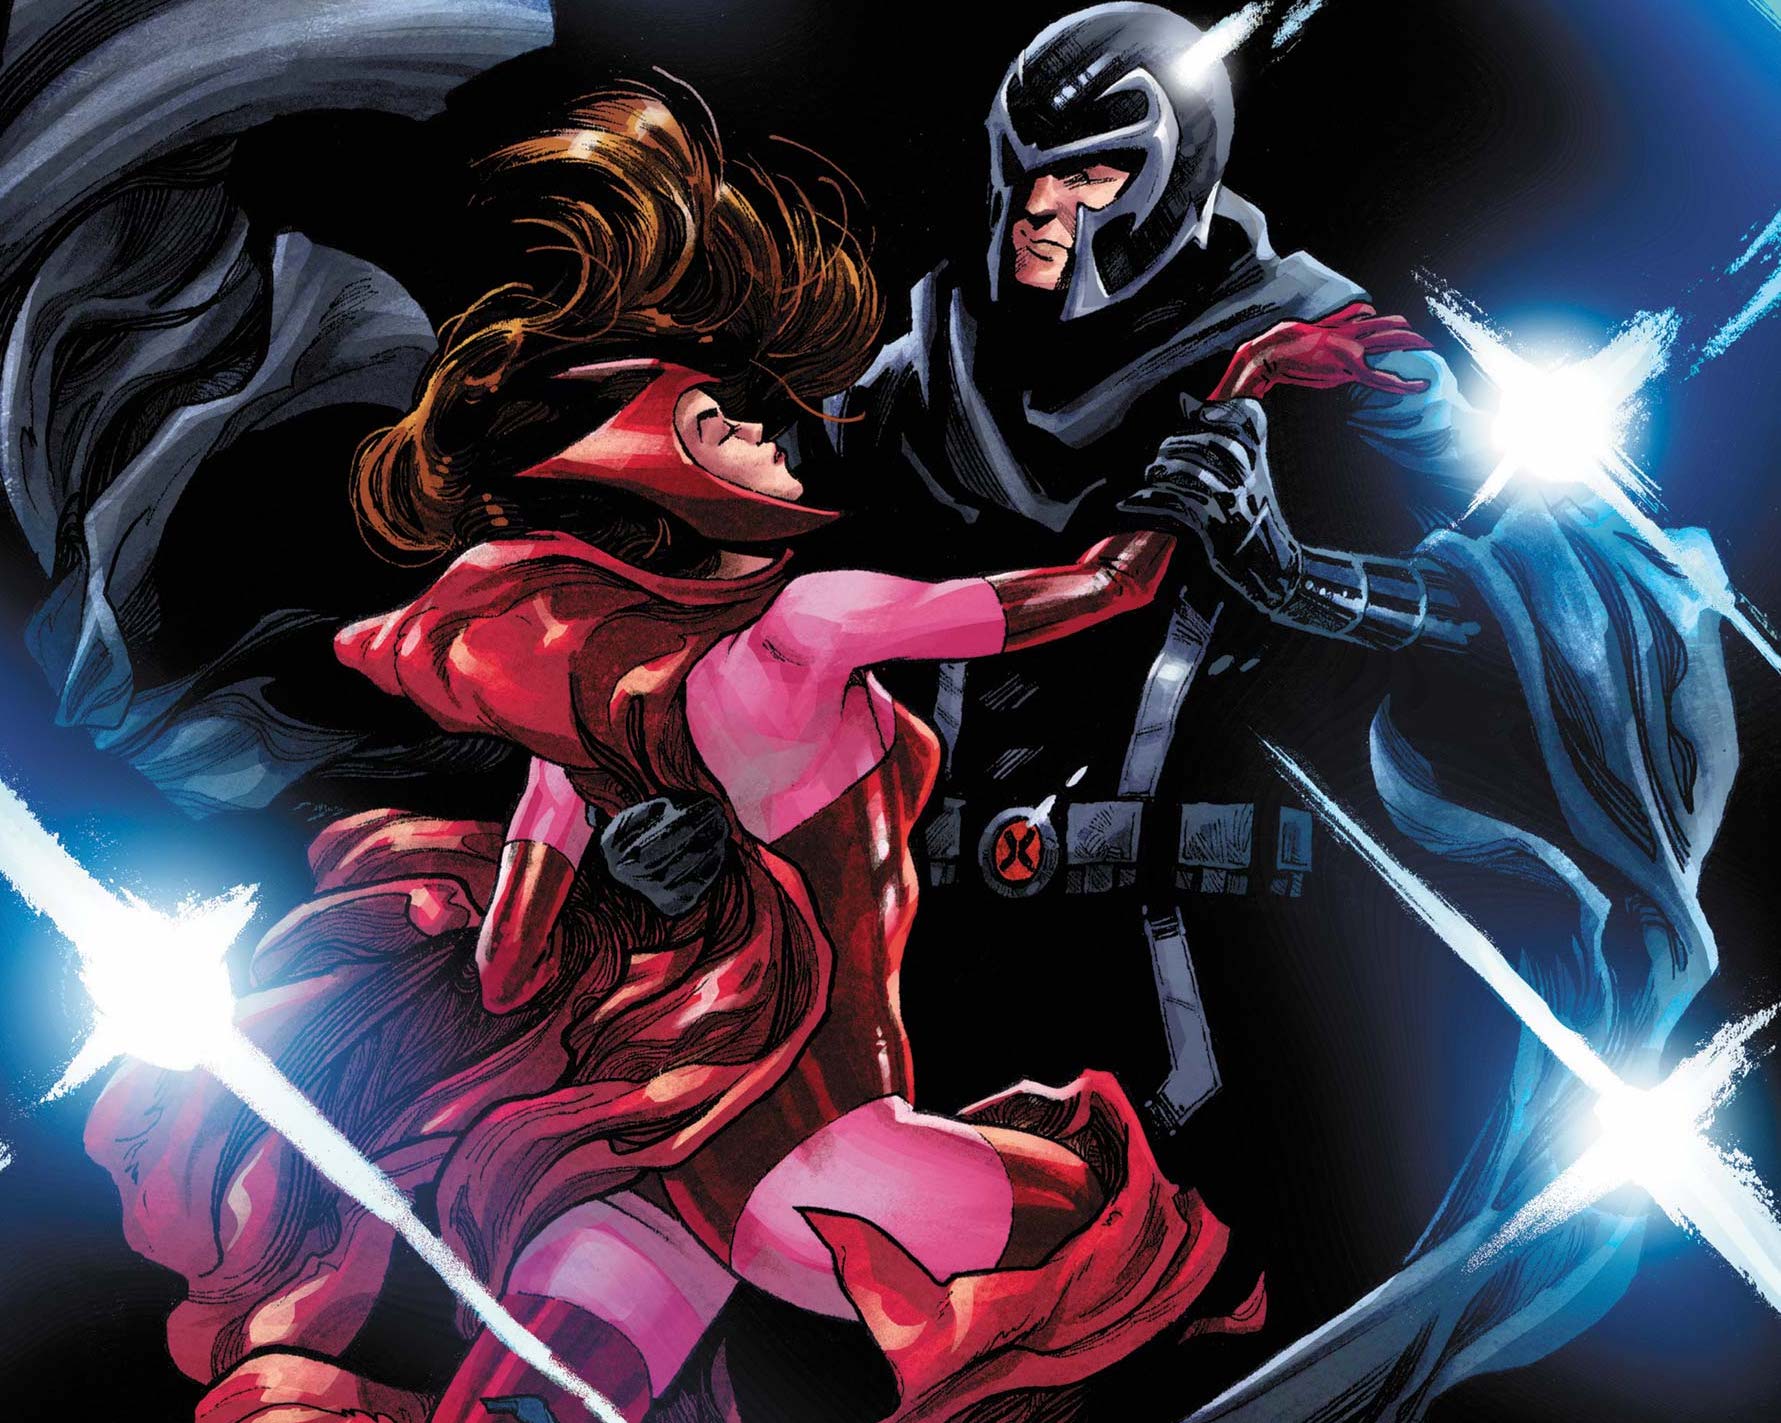 'X-Men: The Trial of Magneto' #5 is a lackluster ending to a lackluster event